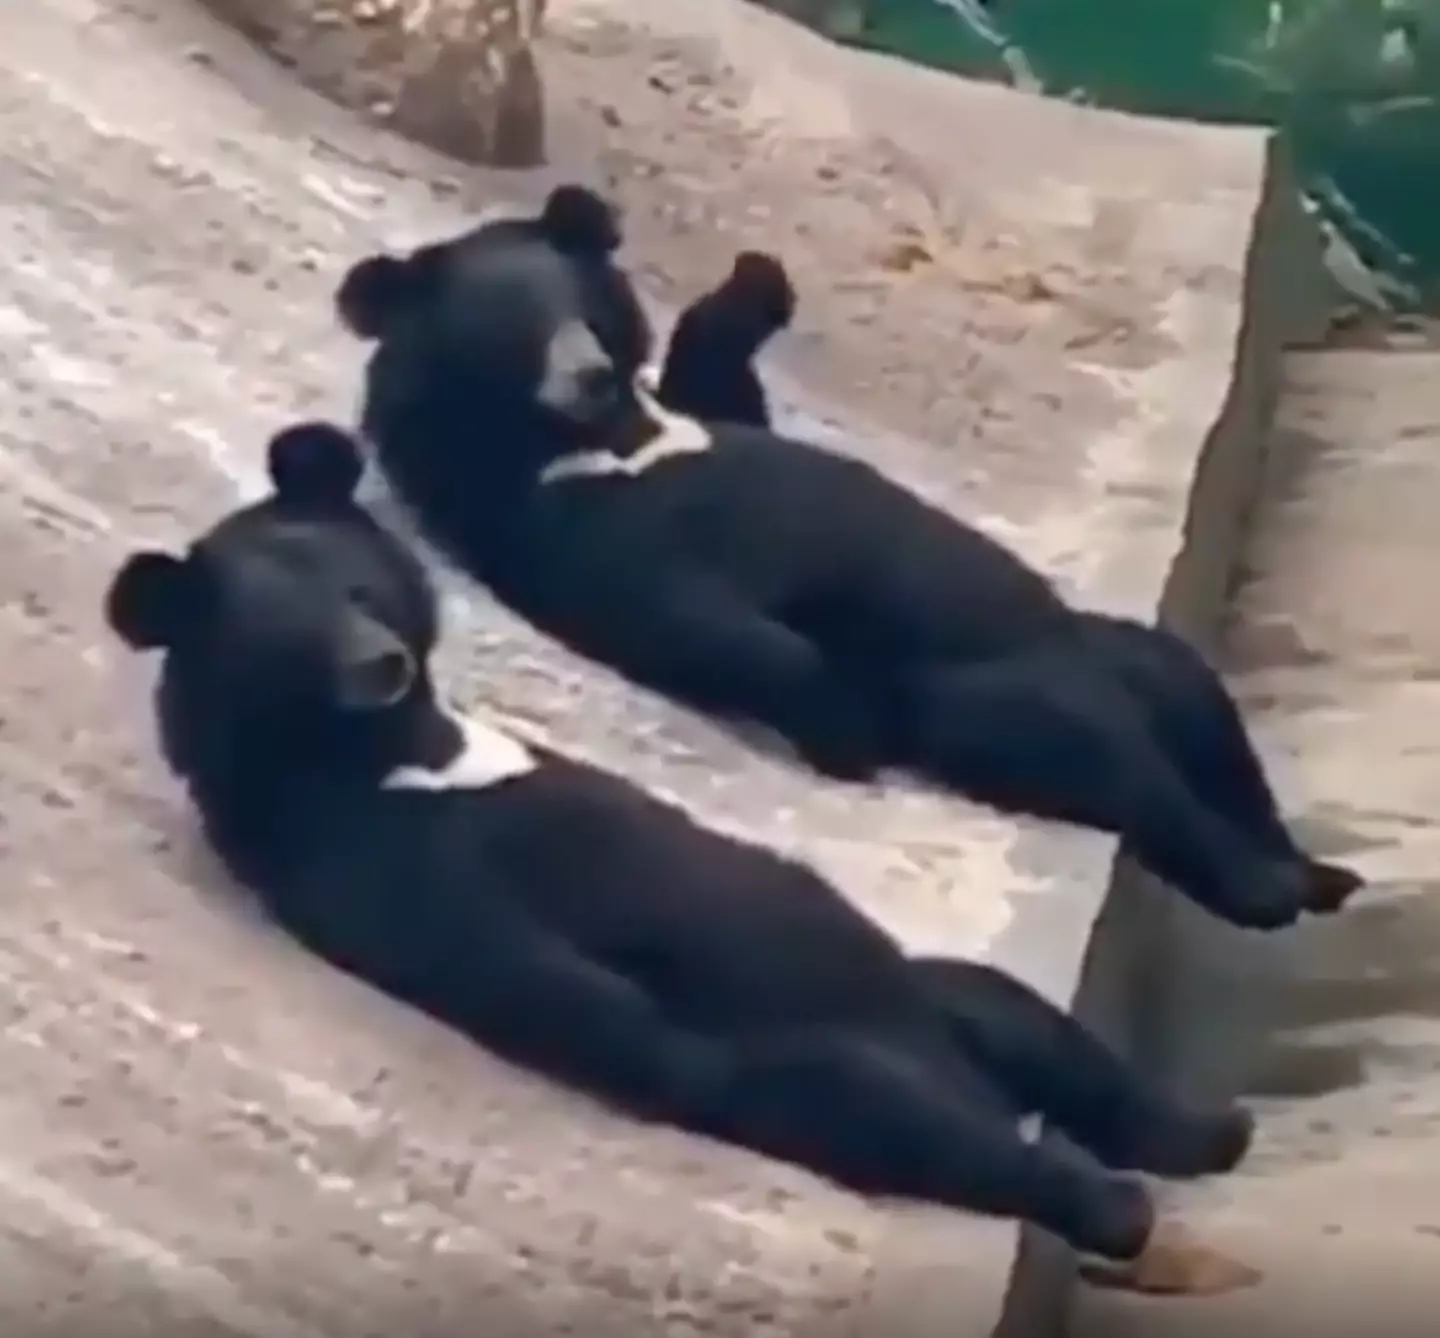 The two bears appeared to be living their best lives.